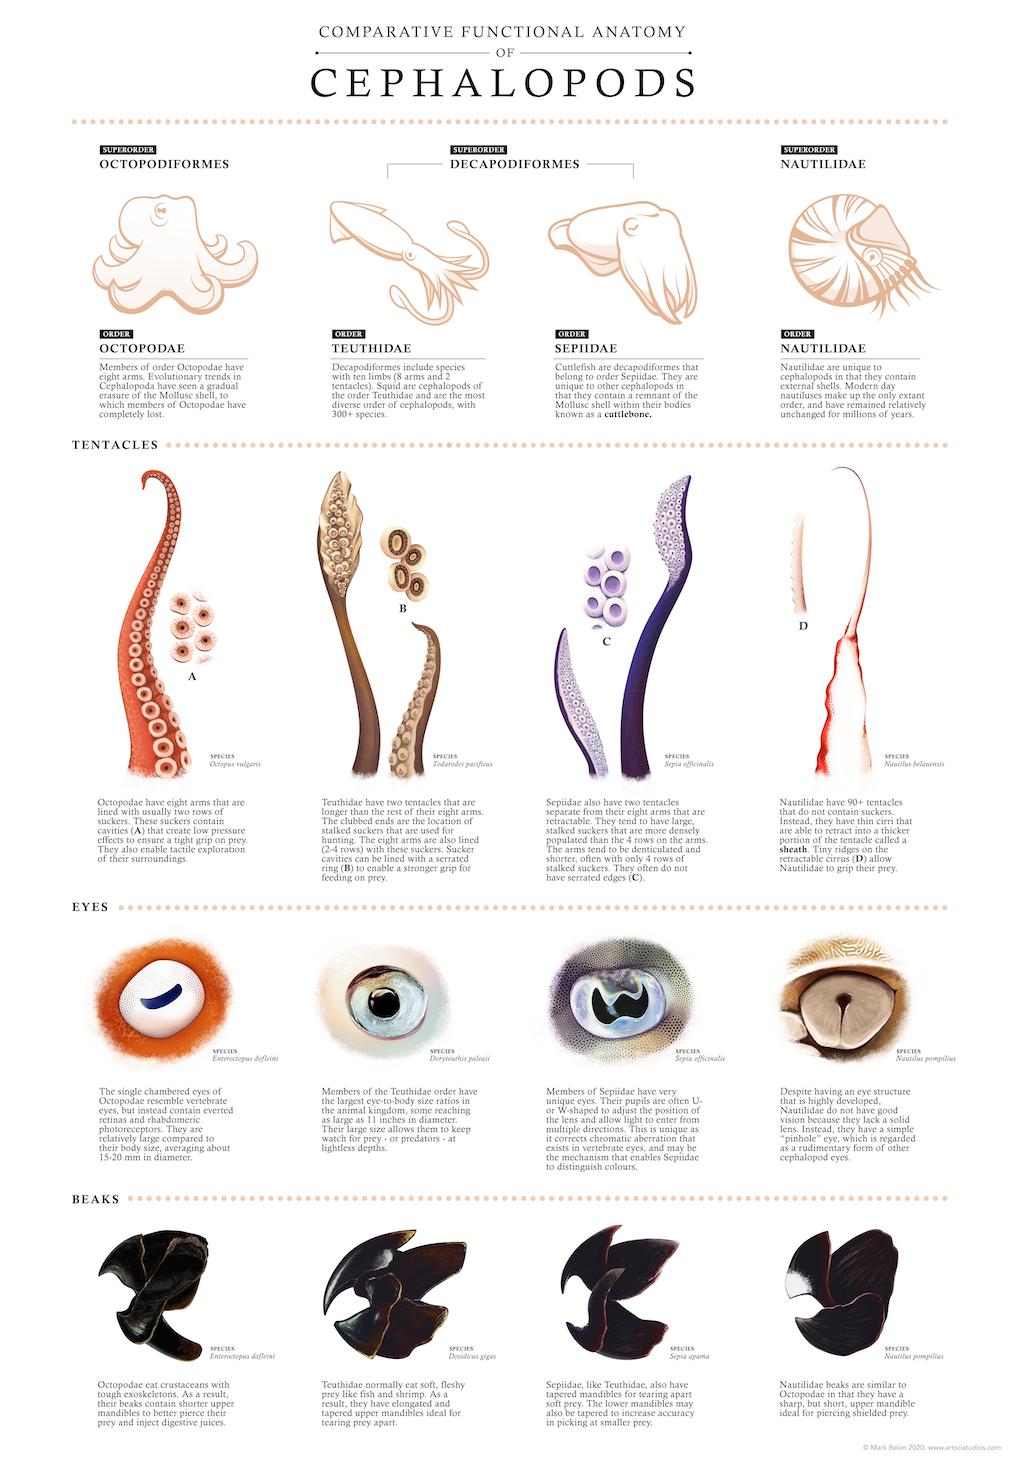 Comparative Functional Anatomy of Cephalopods